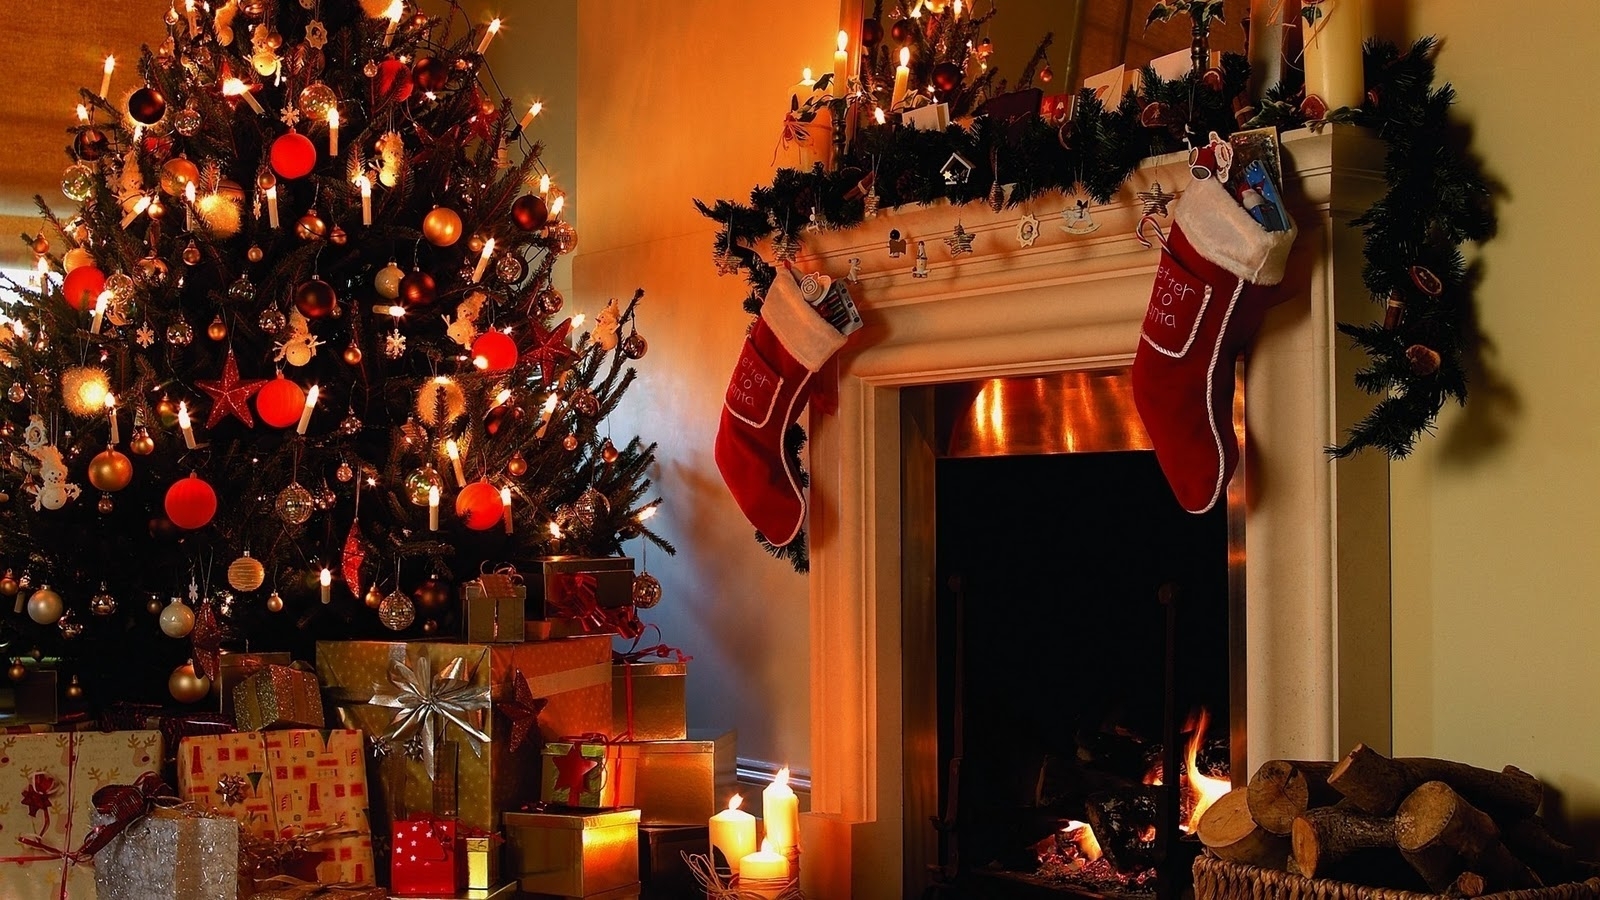 10 Most Popular Free Christmas Fireplace Desktop Backgrounds FULL HD 1920×1080 For PC Background